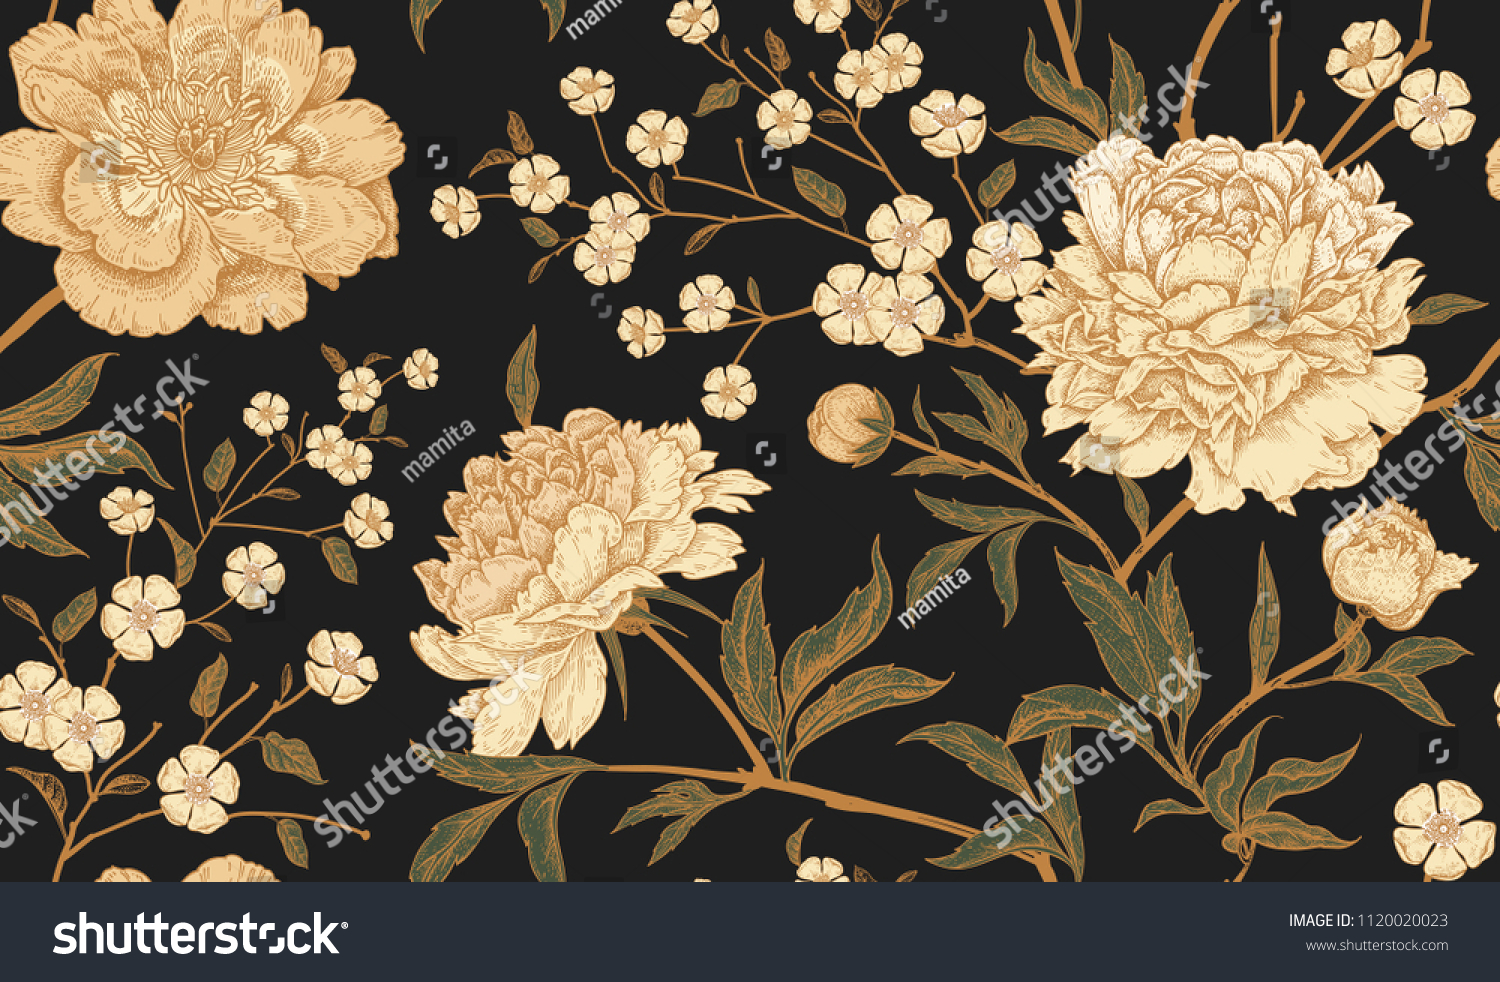 Floral vintage seamless pattern with flowers peonies. Oriental style. Vector illustration art. Template design for textiles, wrapping paper, wallpaper, clothes, interior, curtains, packaging.  #1120020023